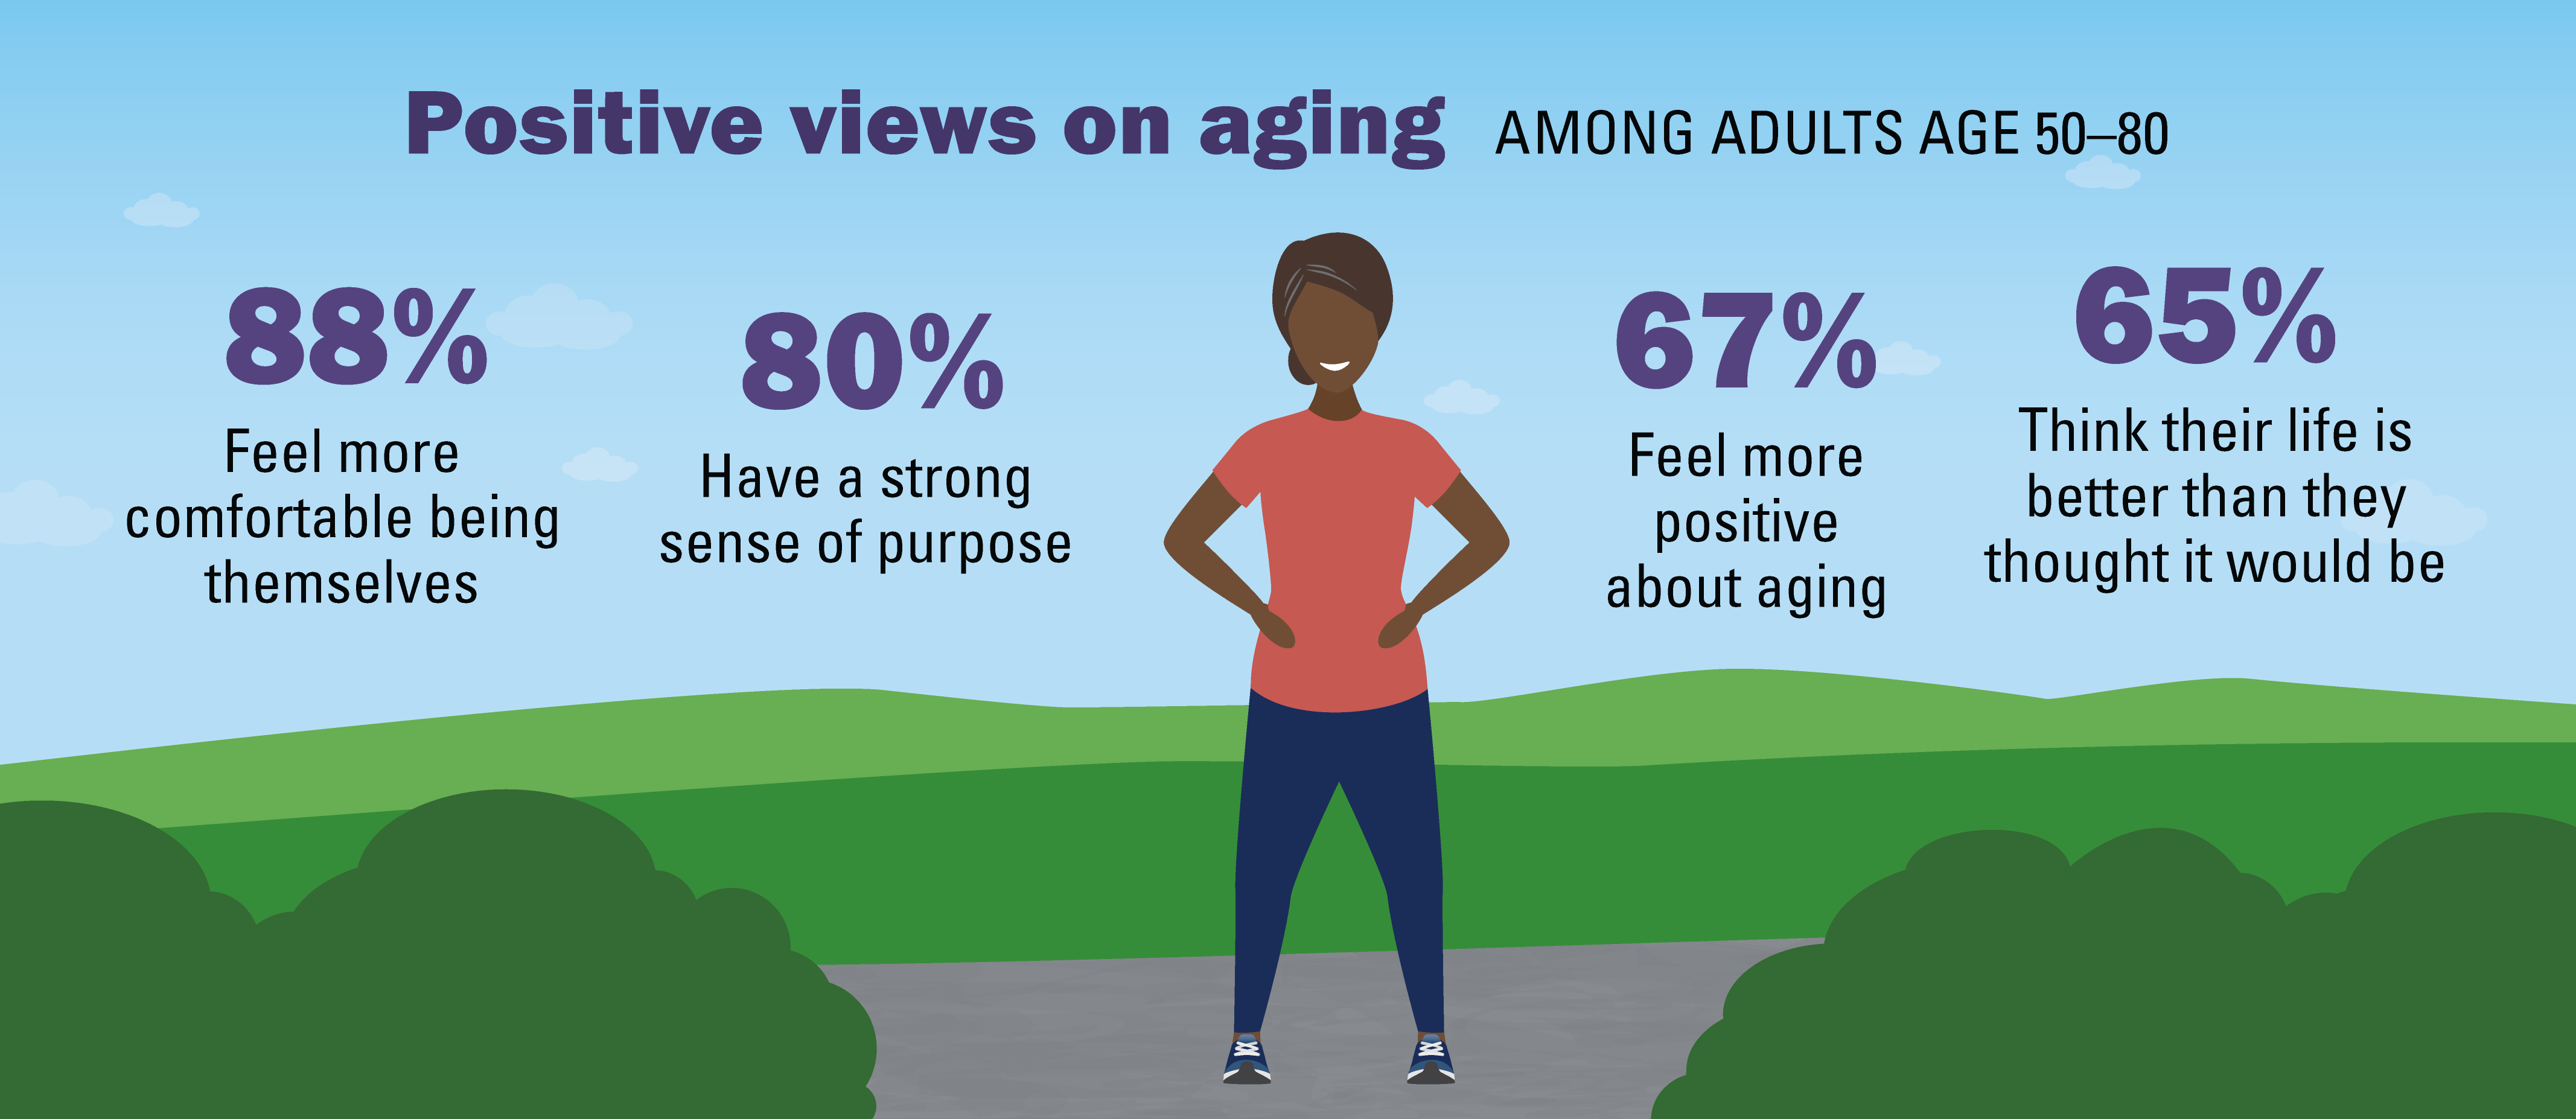 88% feel more comfortable being themselves; 80% have a strong sense of purpose; 67% feel more positive about aging; 65% think their life is better than they thought it would be